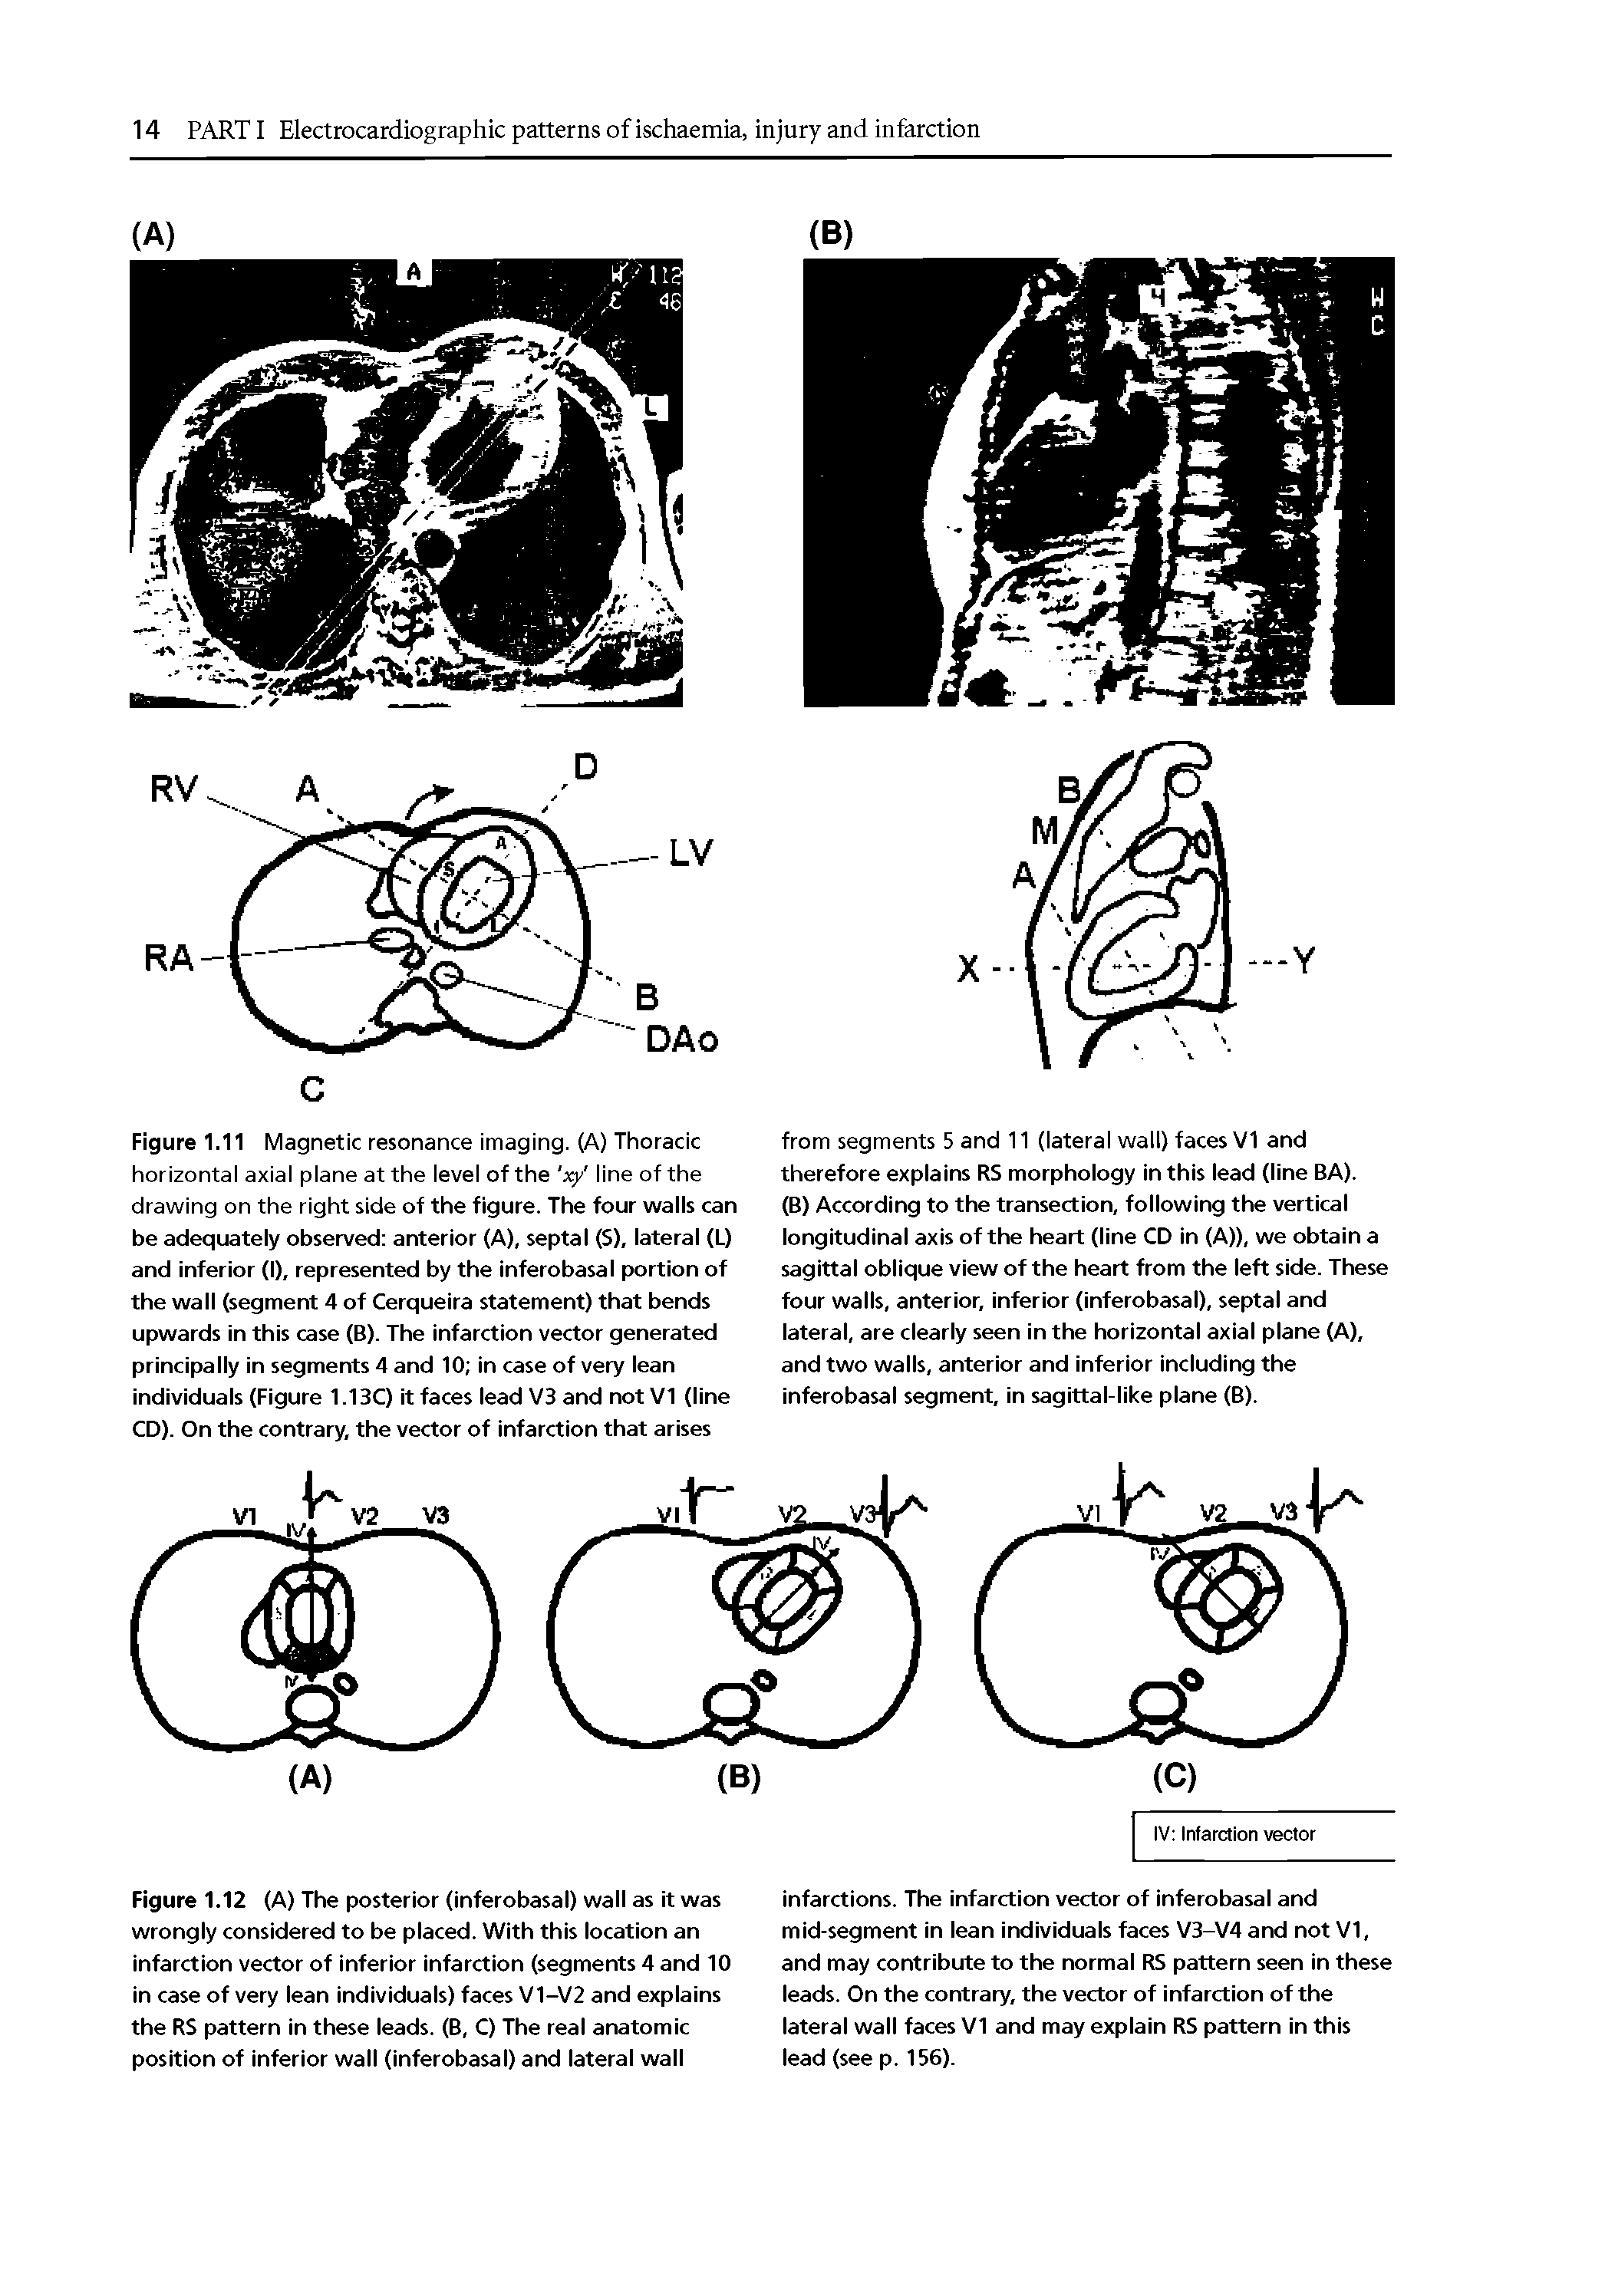 Figure 1.12 (A) The posterior (inferobasal) wall as it was wrongly considered to be placed. With this location an infarction vector of inferior infarction (segments 4 and 10 in case of very lean individuals) faces V1-V2 and explains the RS pattern in these leads. (B, C) The real anatomic position of inferior wall (inferobasal) and lateral wall...